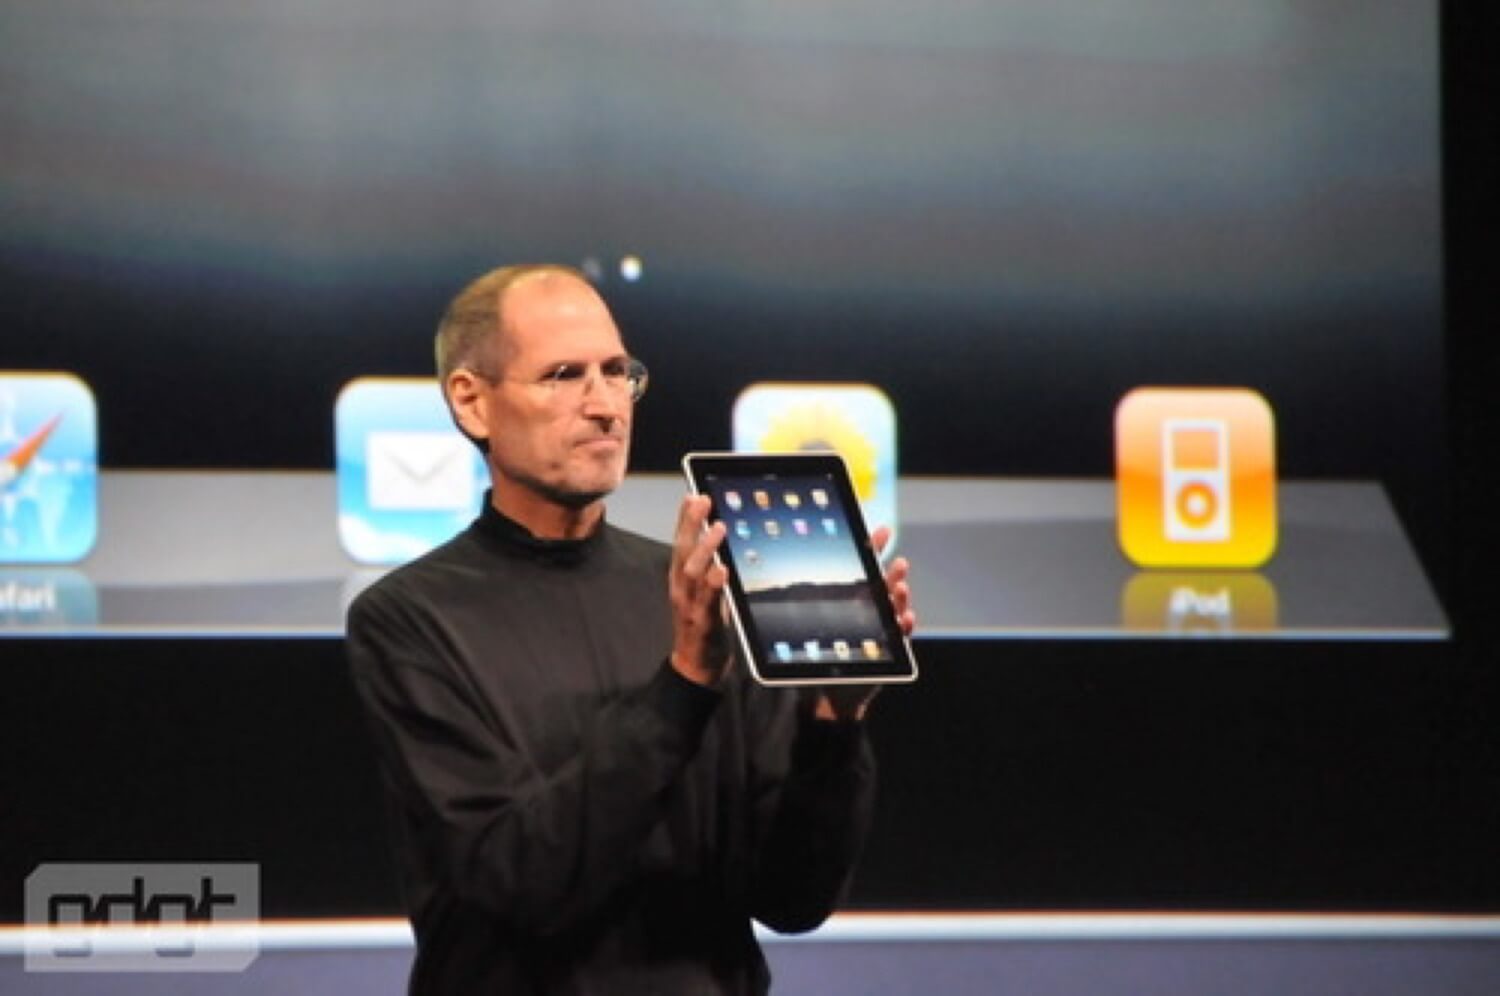 On stage like Apple’s Steve Jobs: 3 Mistakes to avoid when presenting